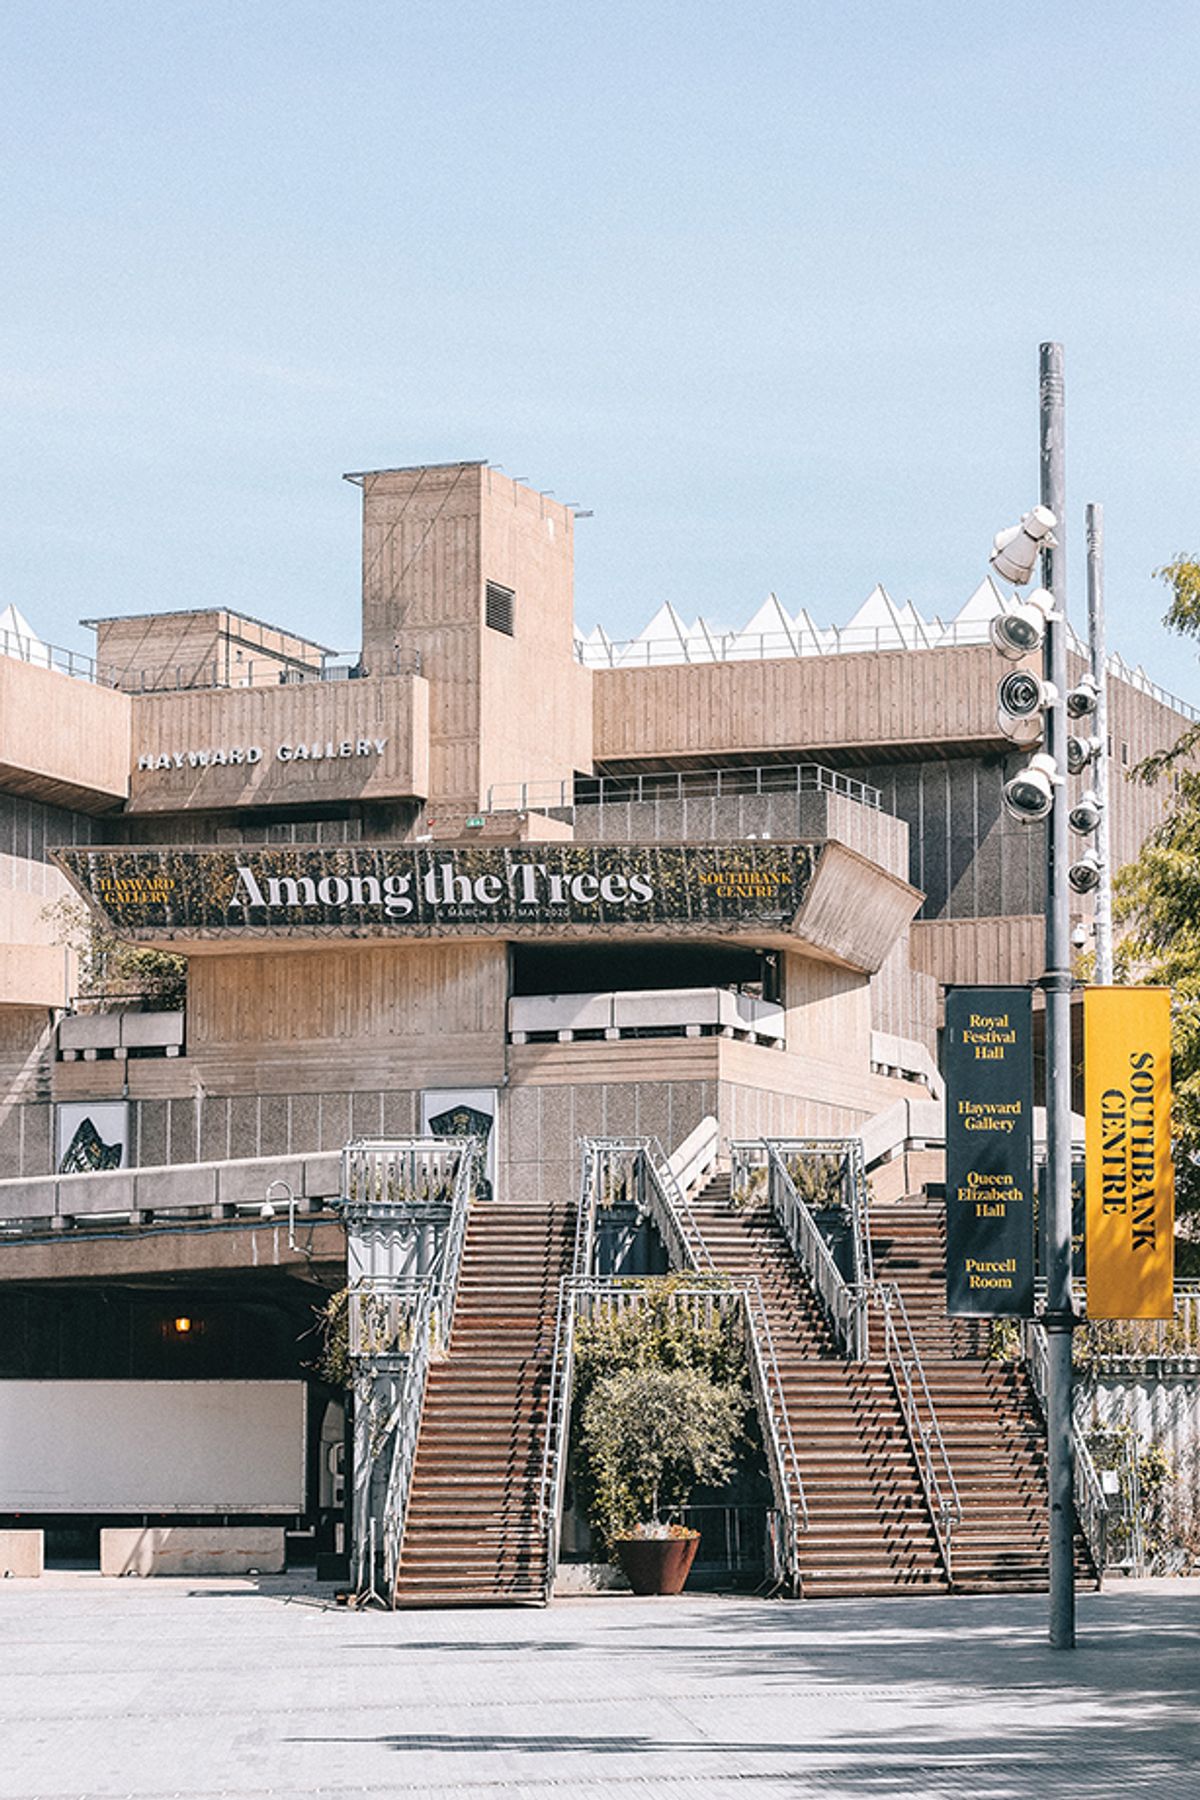 The Hayward Gallery at the Brutalist Southbank Centre, built in the 1950s and 60s; the centre’s management is investigating whether any buildings in the centre contain Raac
© Kutan Ural